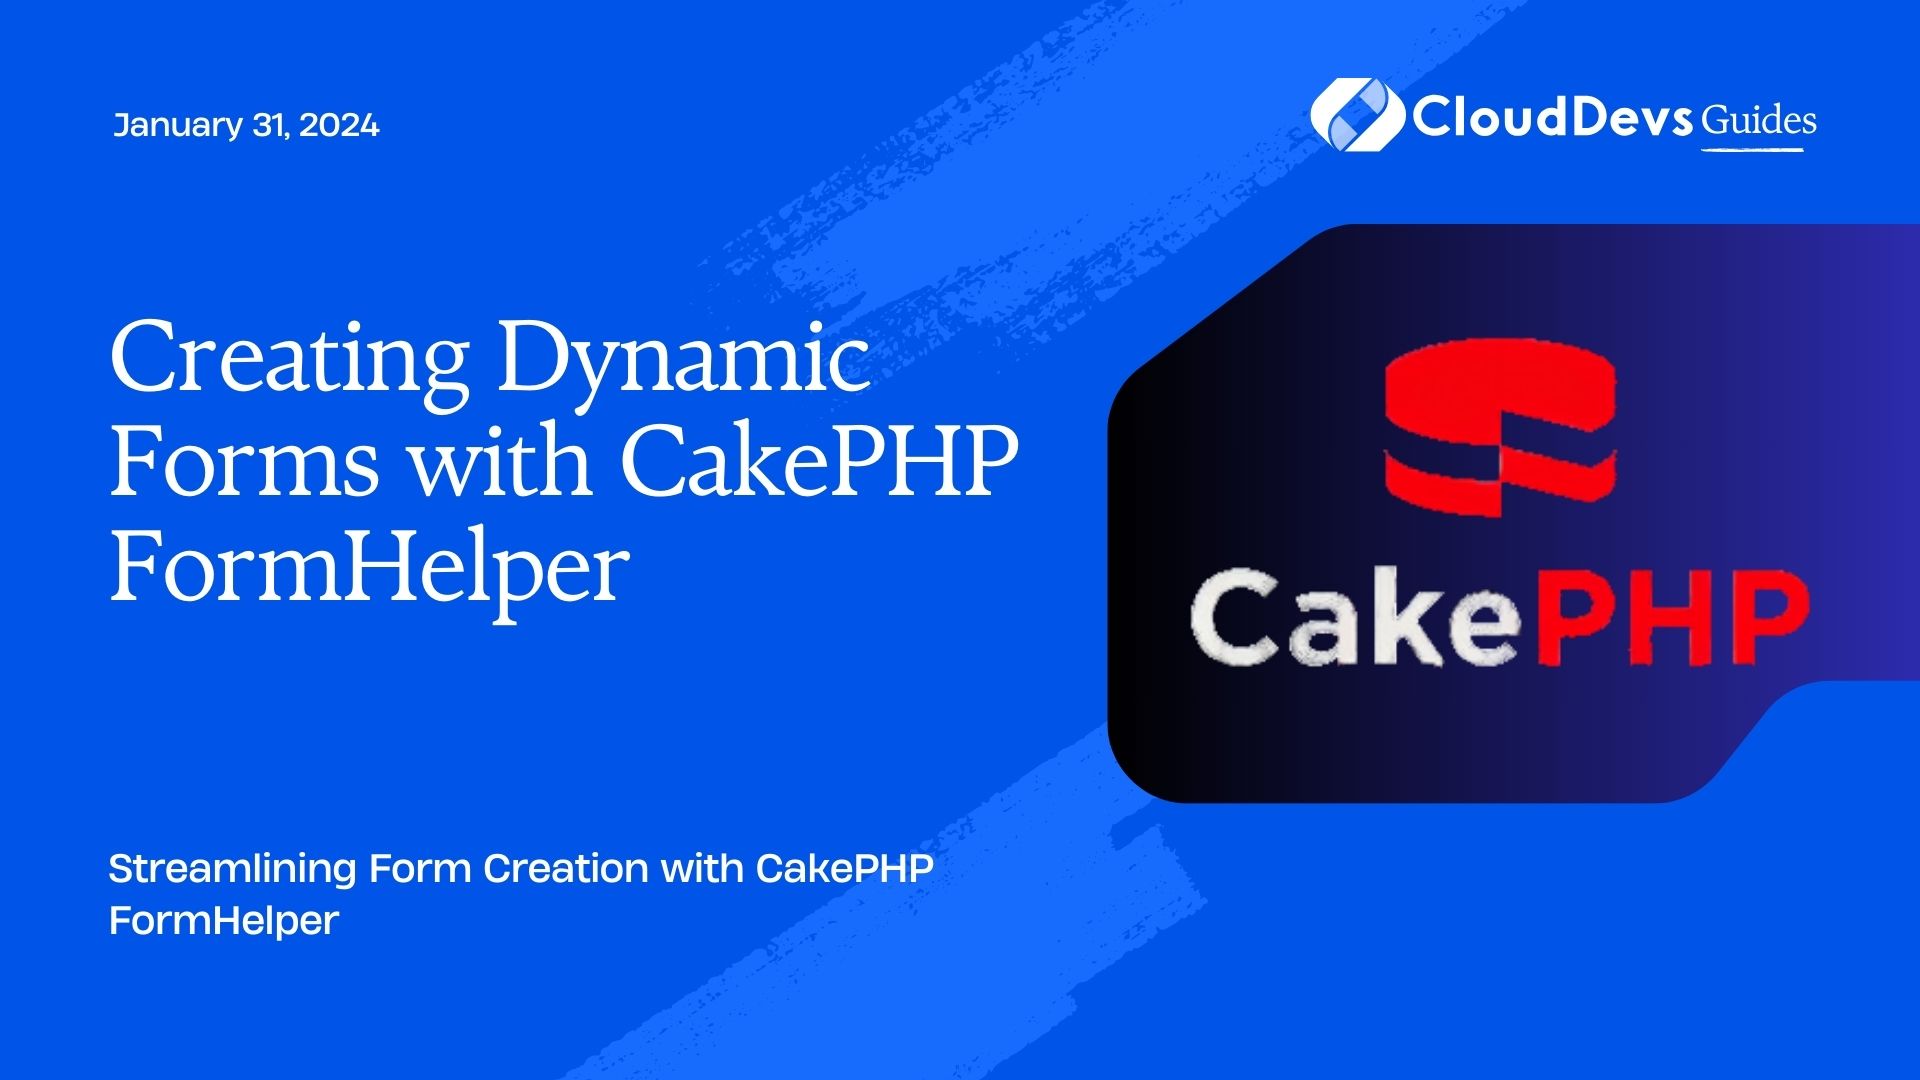 Creating Dynamic Forms with CakePHP FormHelper